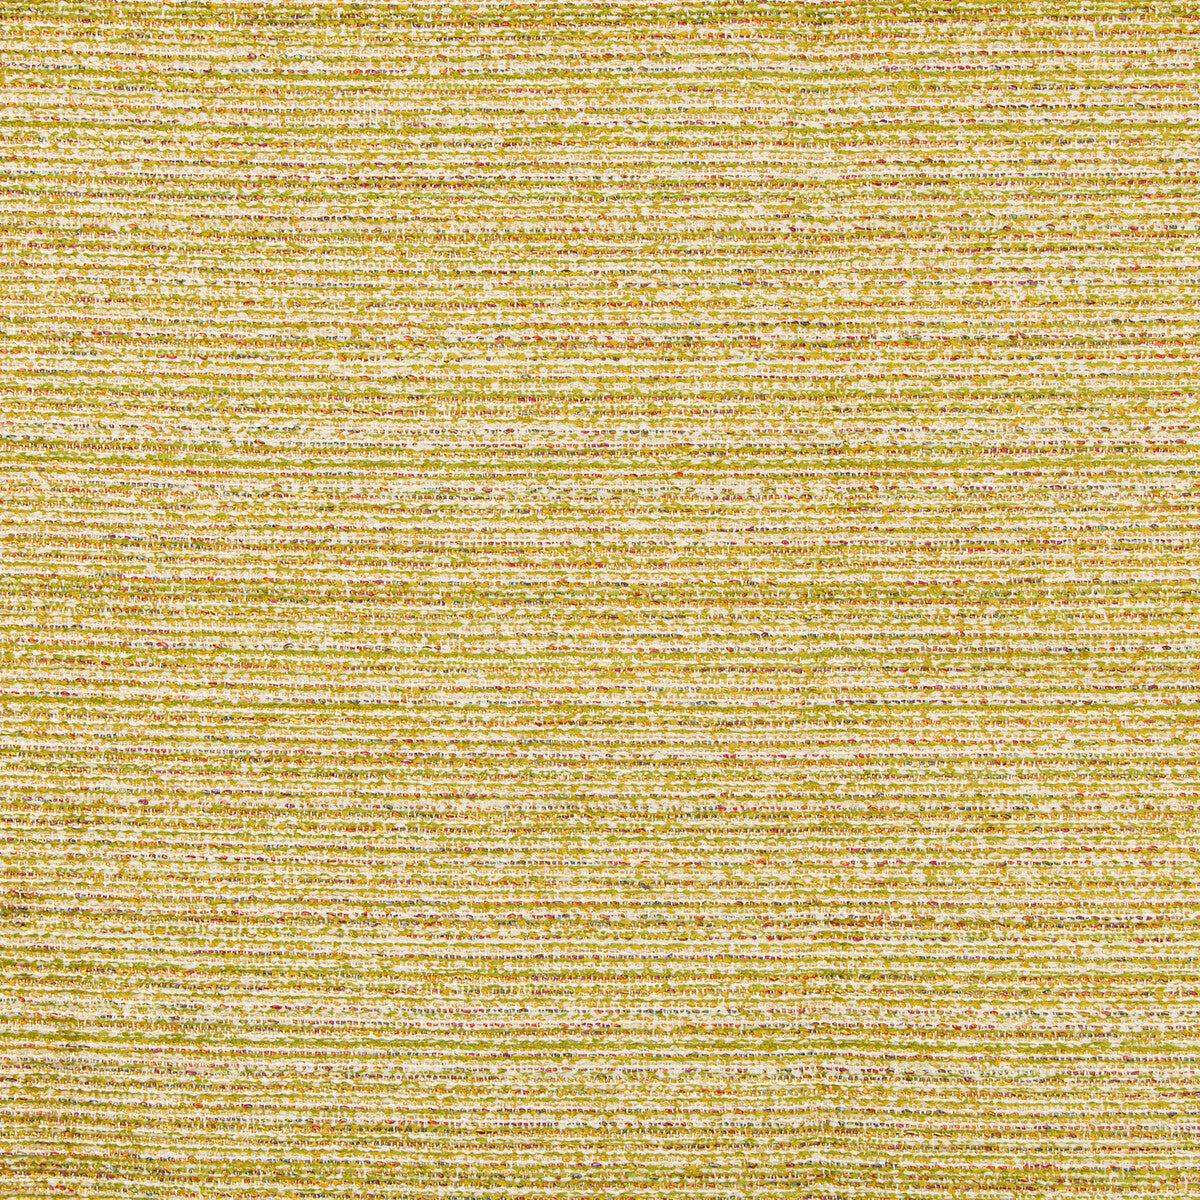 Kravet Design fabric in 36079-34 color - pattern 36079.34.0 - by Kravet Design in the Inside Out Performance Fabrics collection